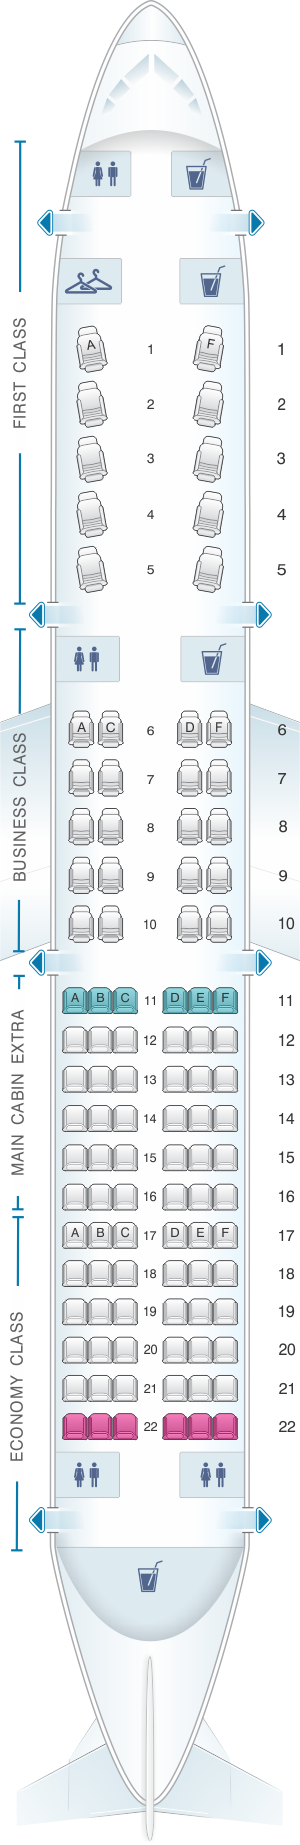 Seat map for American Airlines Airbus A321 Transcontinental